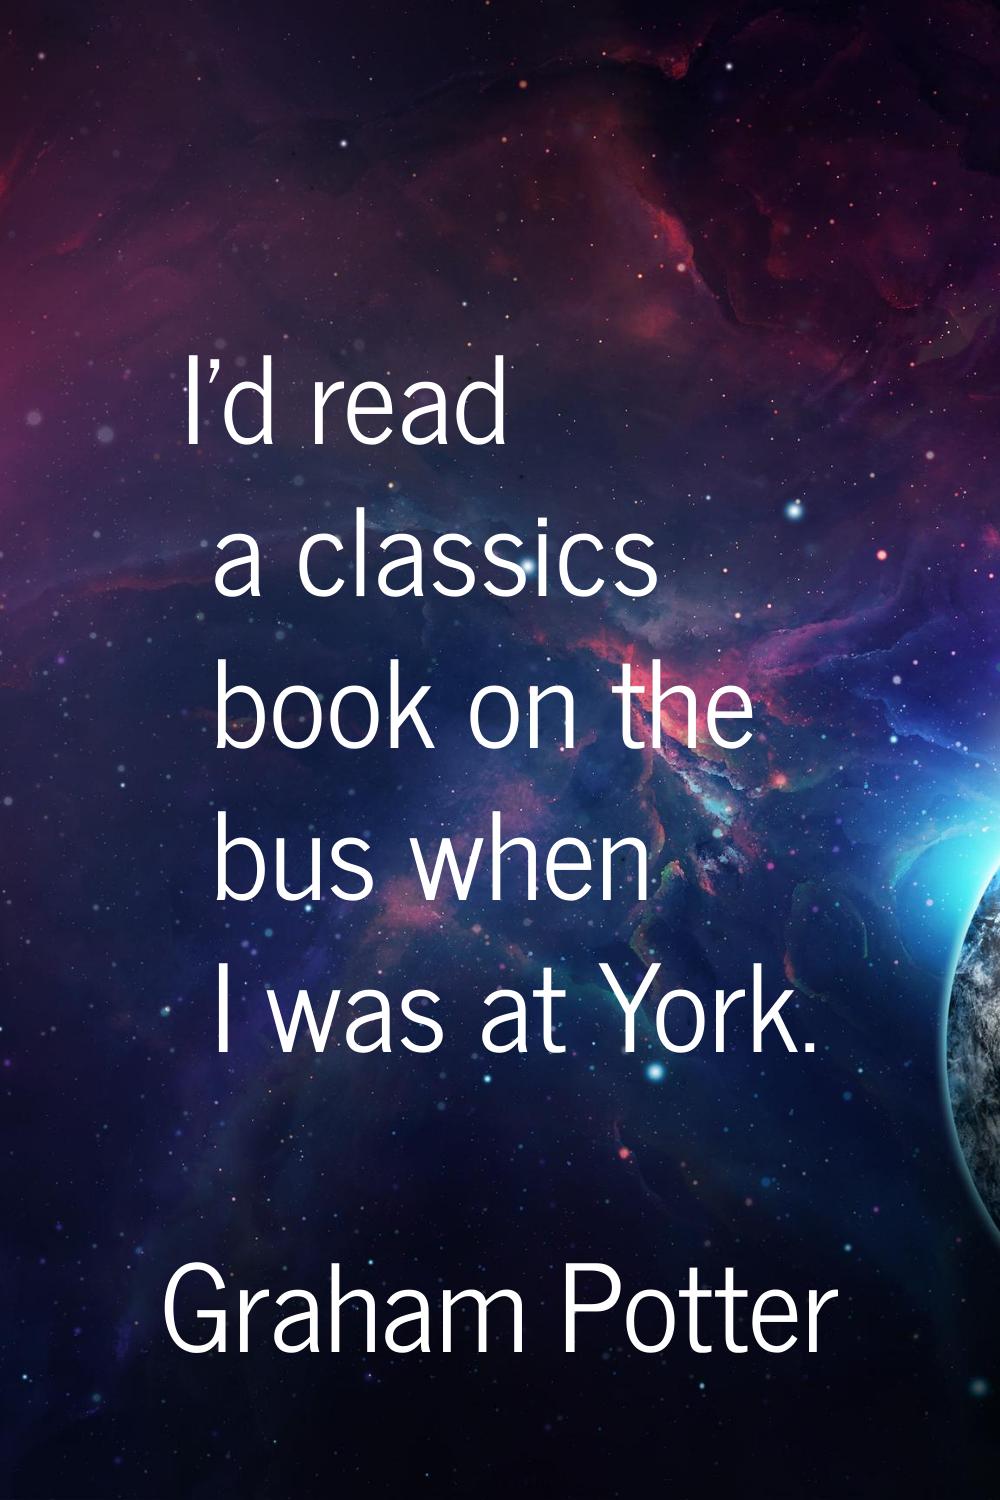 I'd read a classics book on the bus when I was at York.